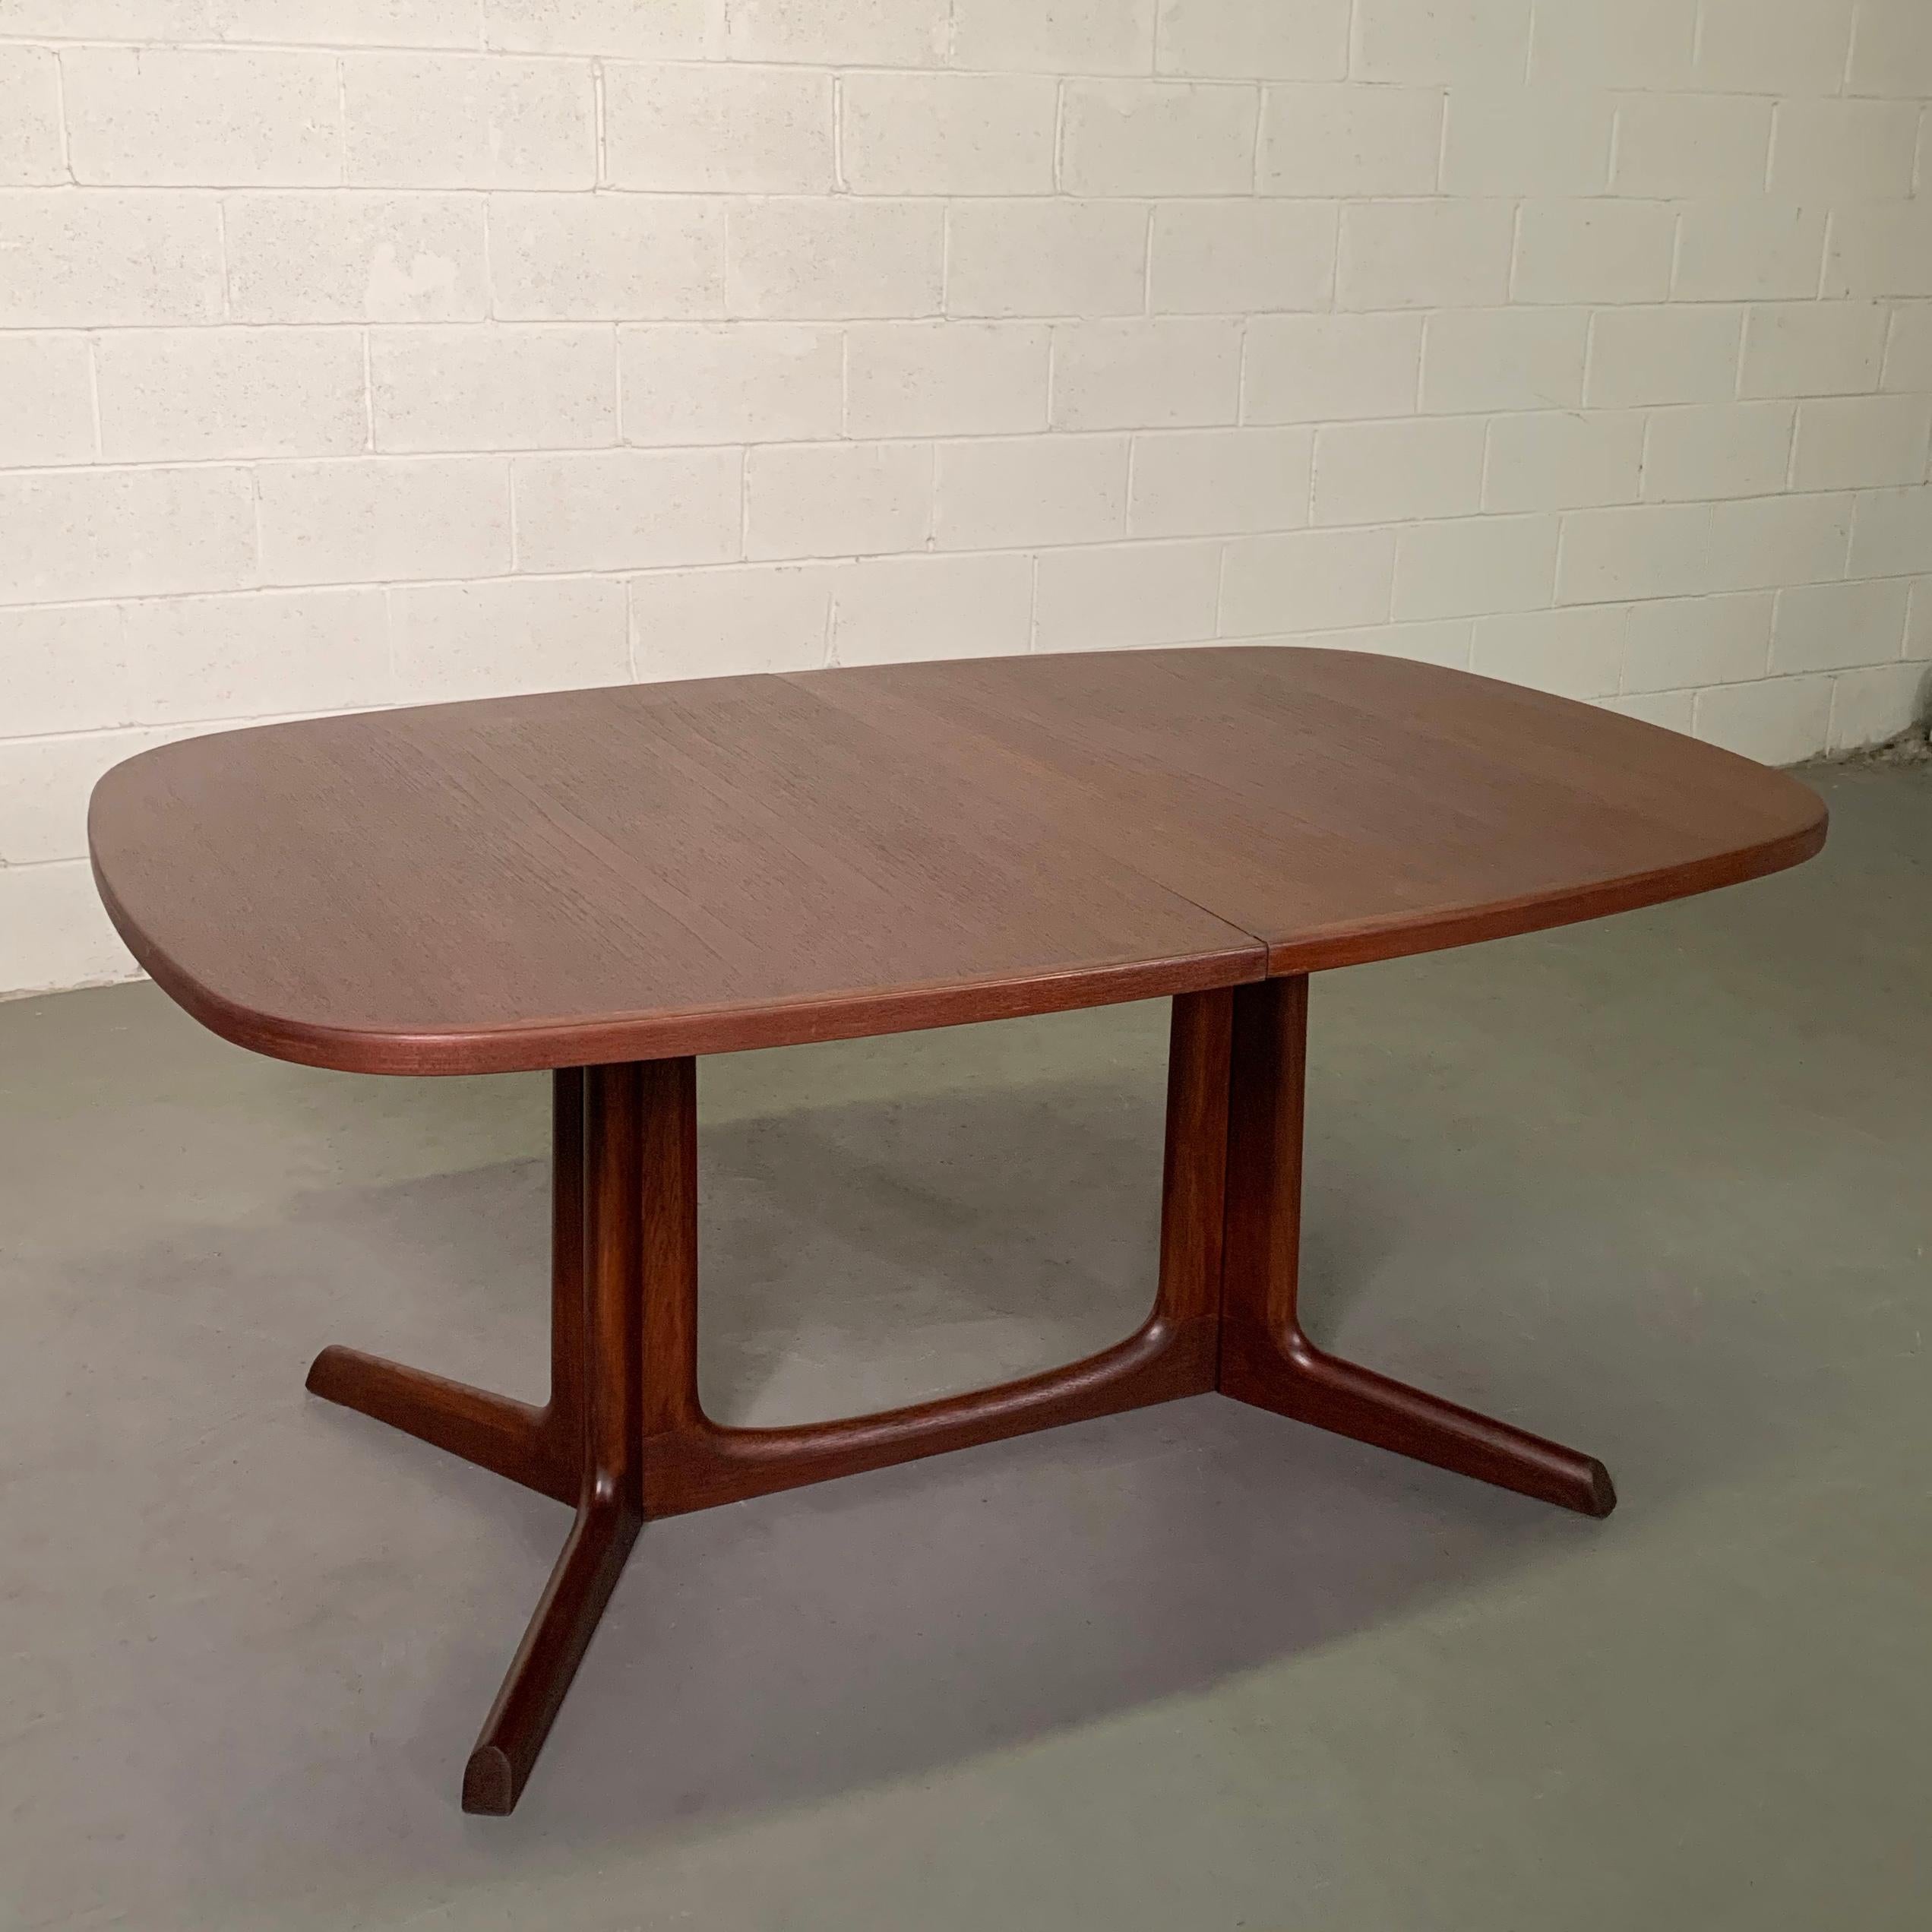 Danish modern, solid teak, extension dining table designed by Niels O. Moller for Gudme Mobilfabrik features rounded edges and a sculptural base. The table has two 19 inch leaves that can extend the table up to 101 inches.